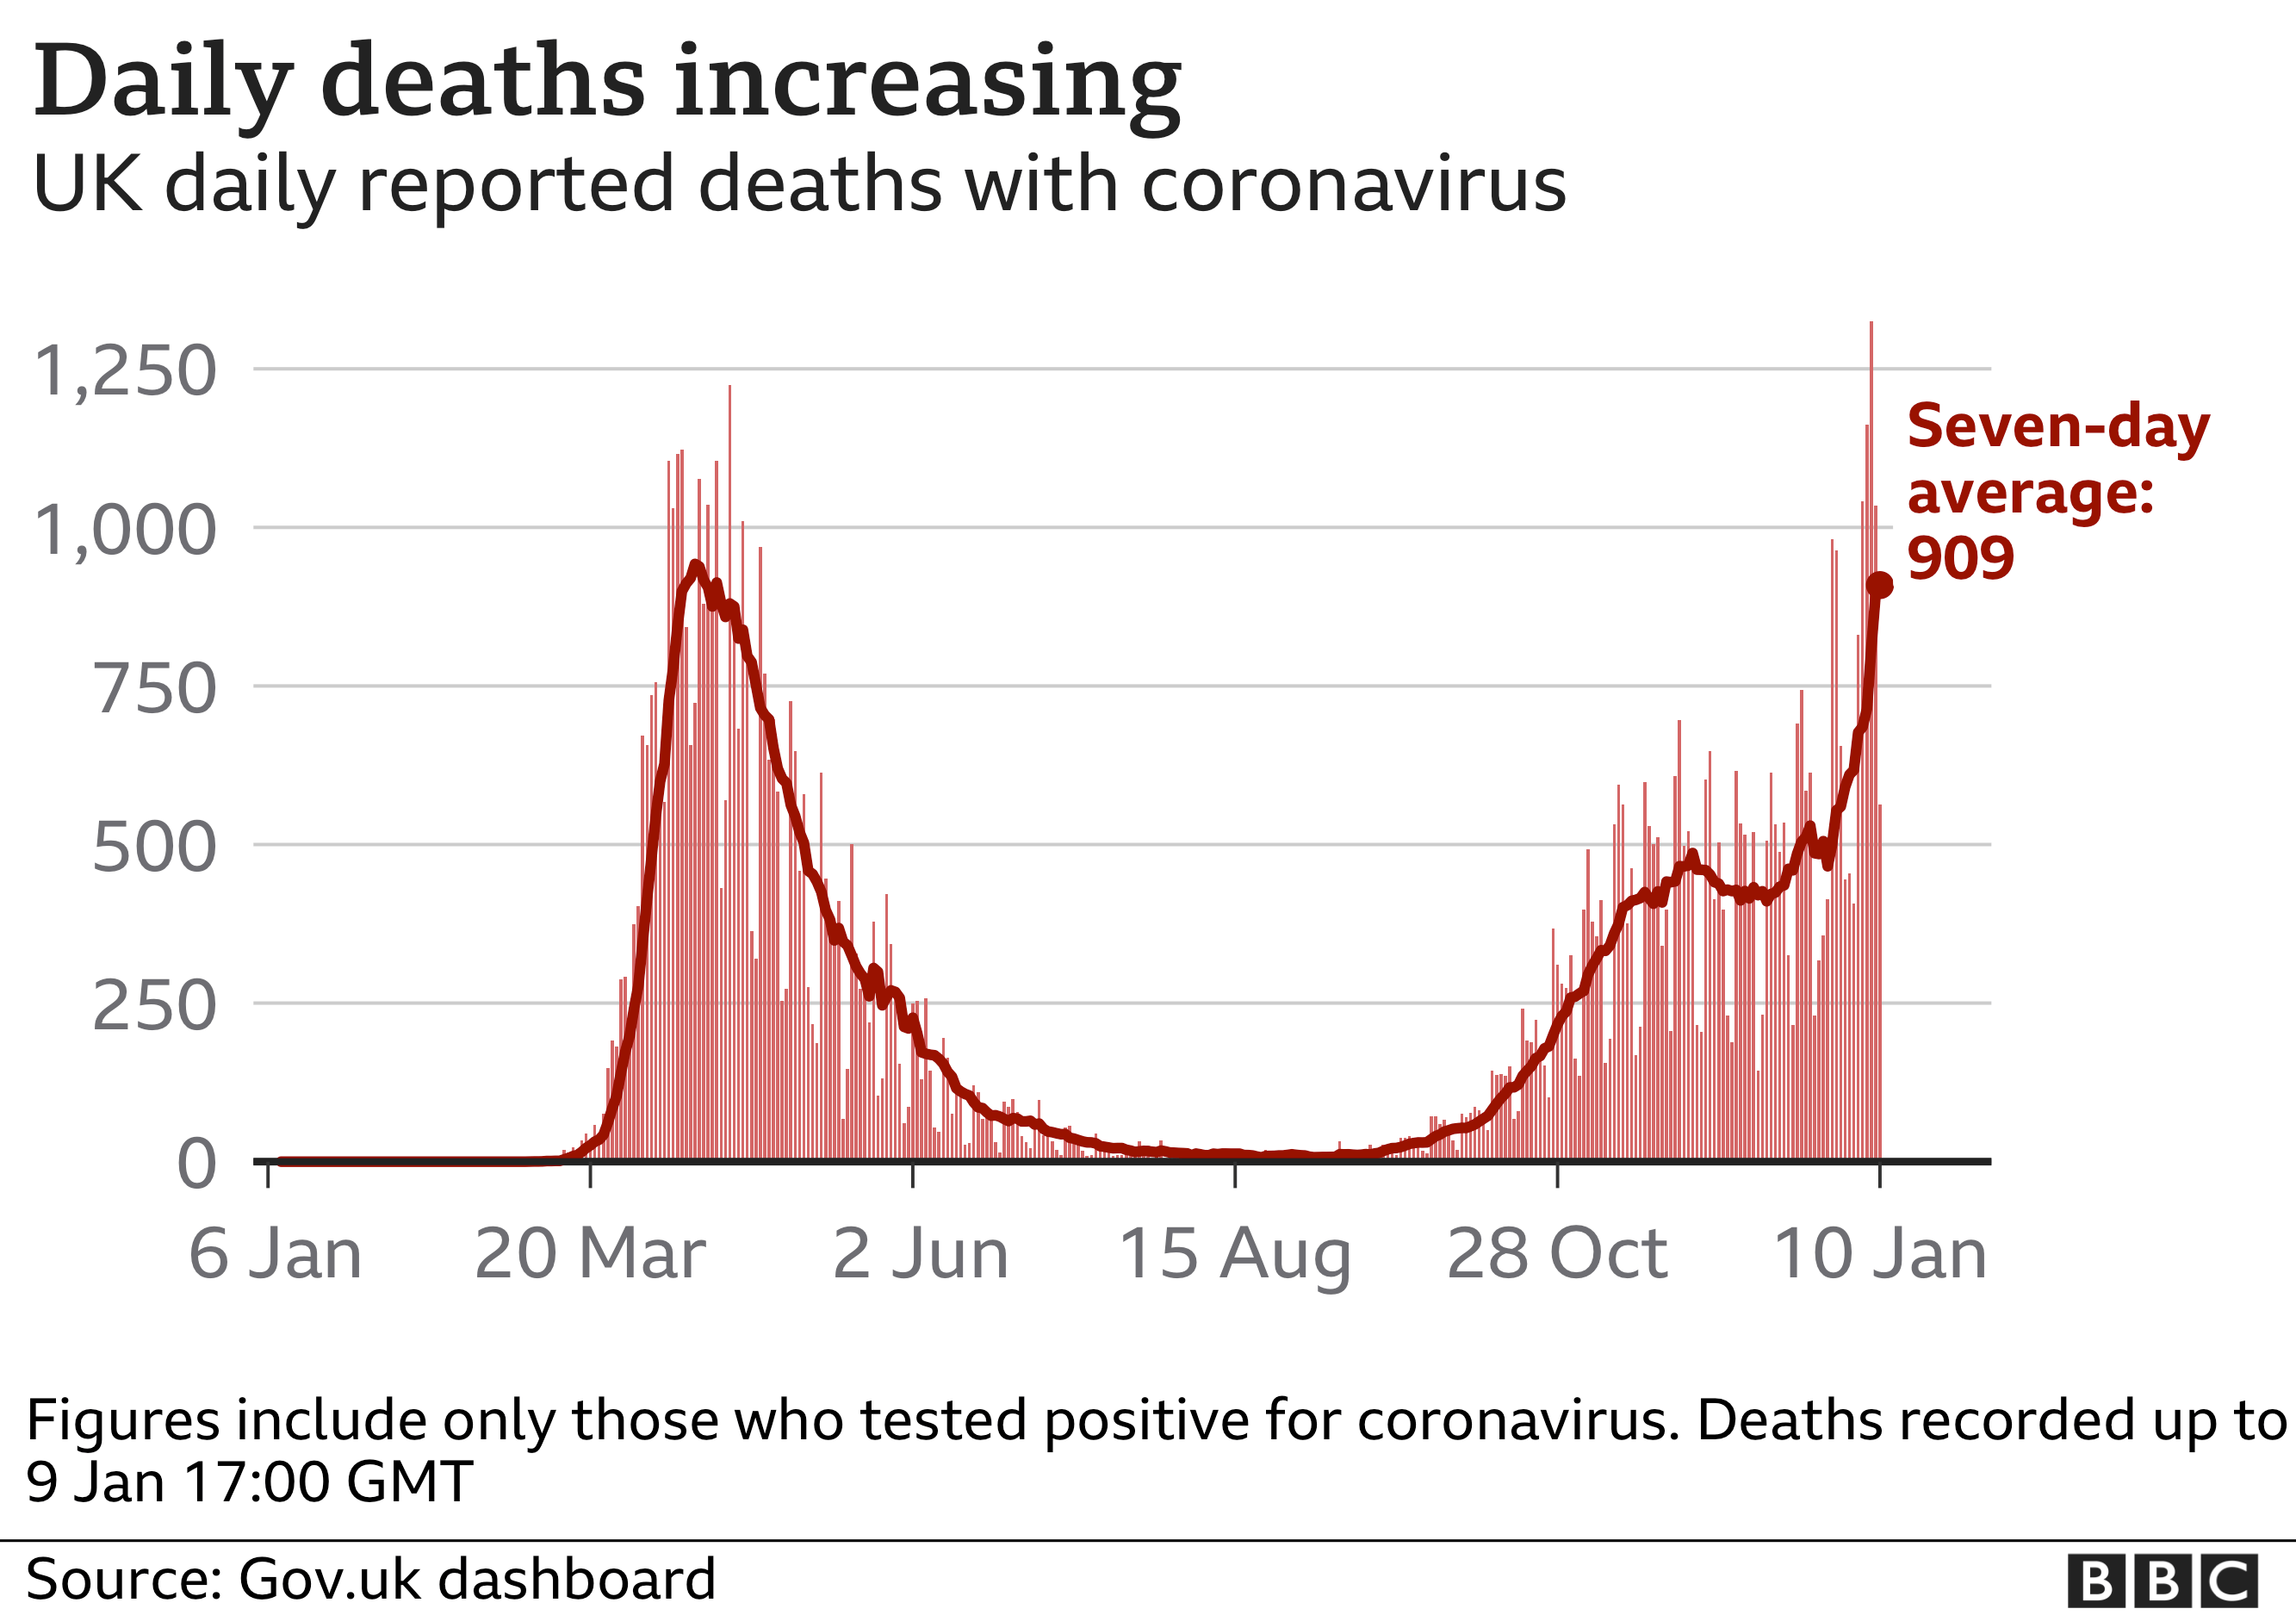 Chart shows daily deaths are continuing to increase